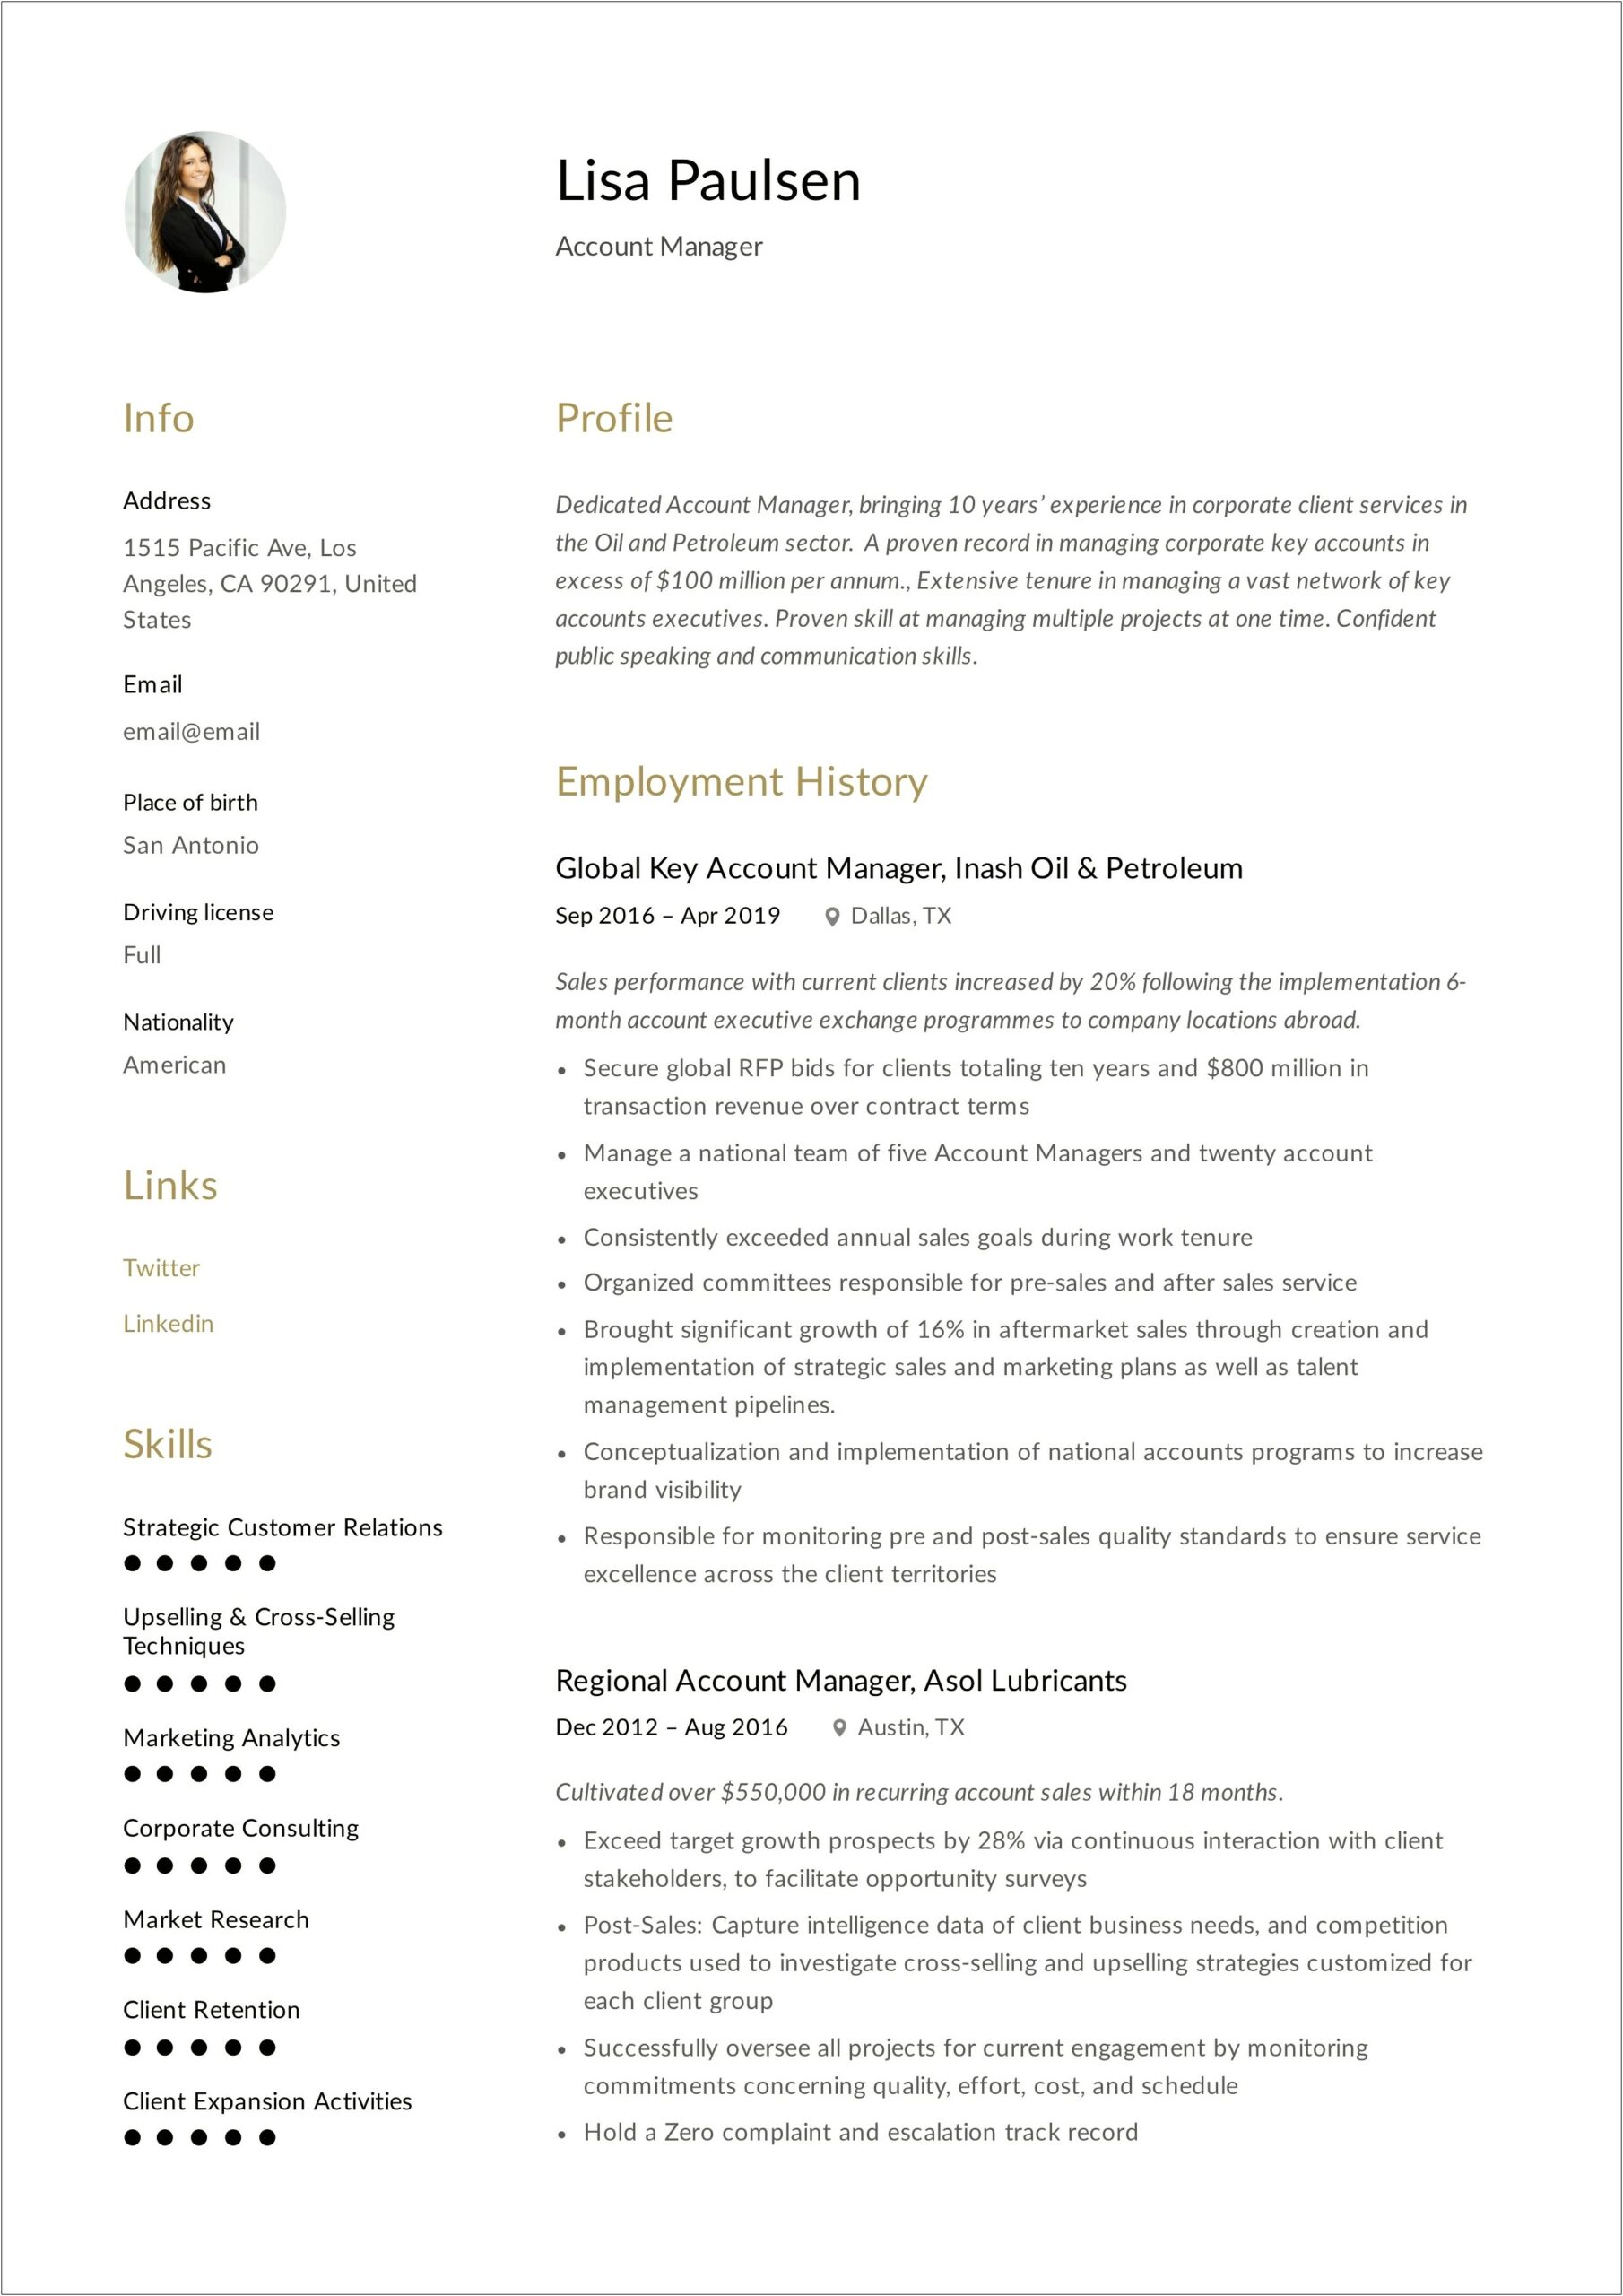 Resume Samples For New Account Manager Position